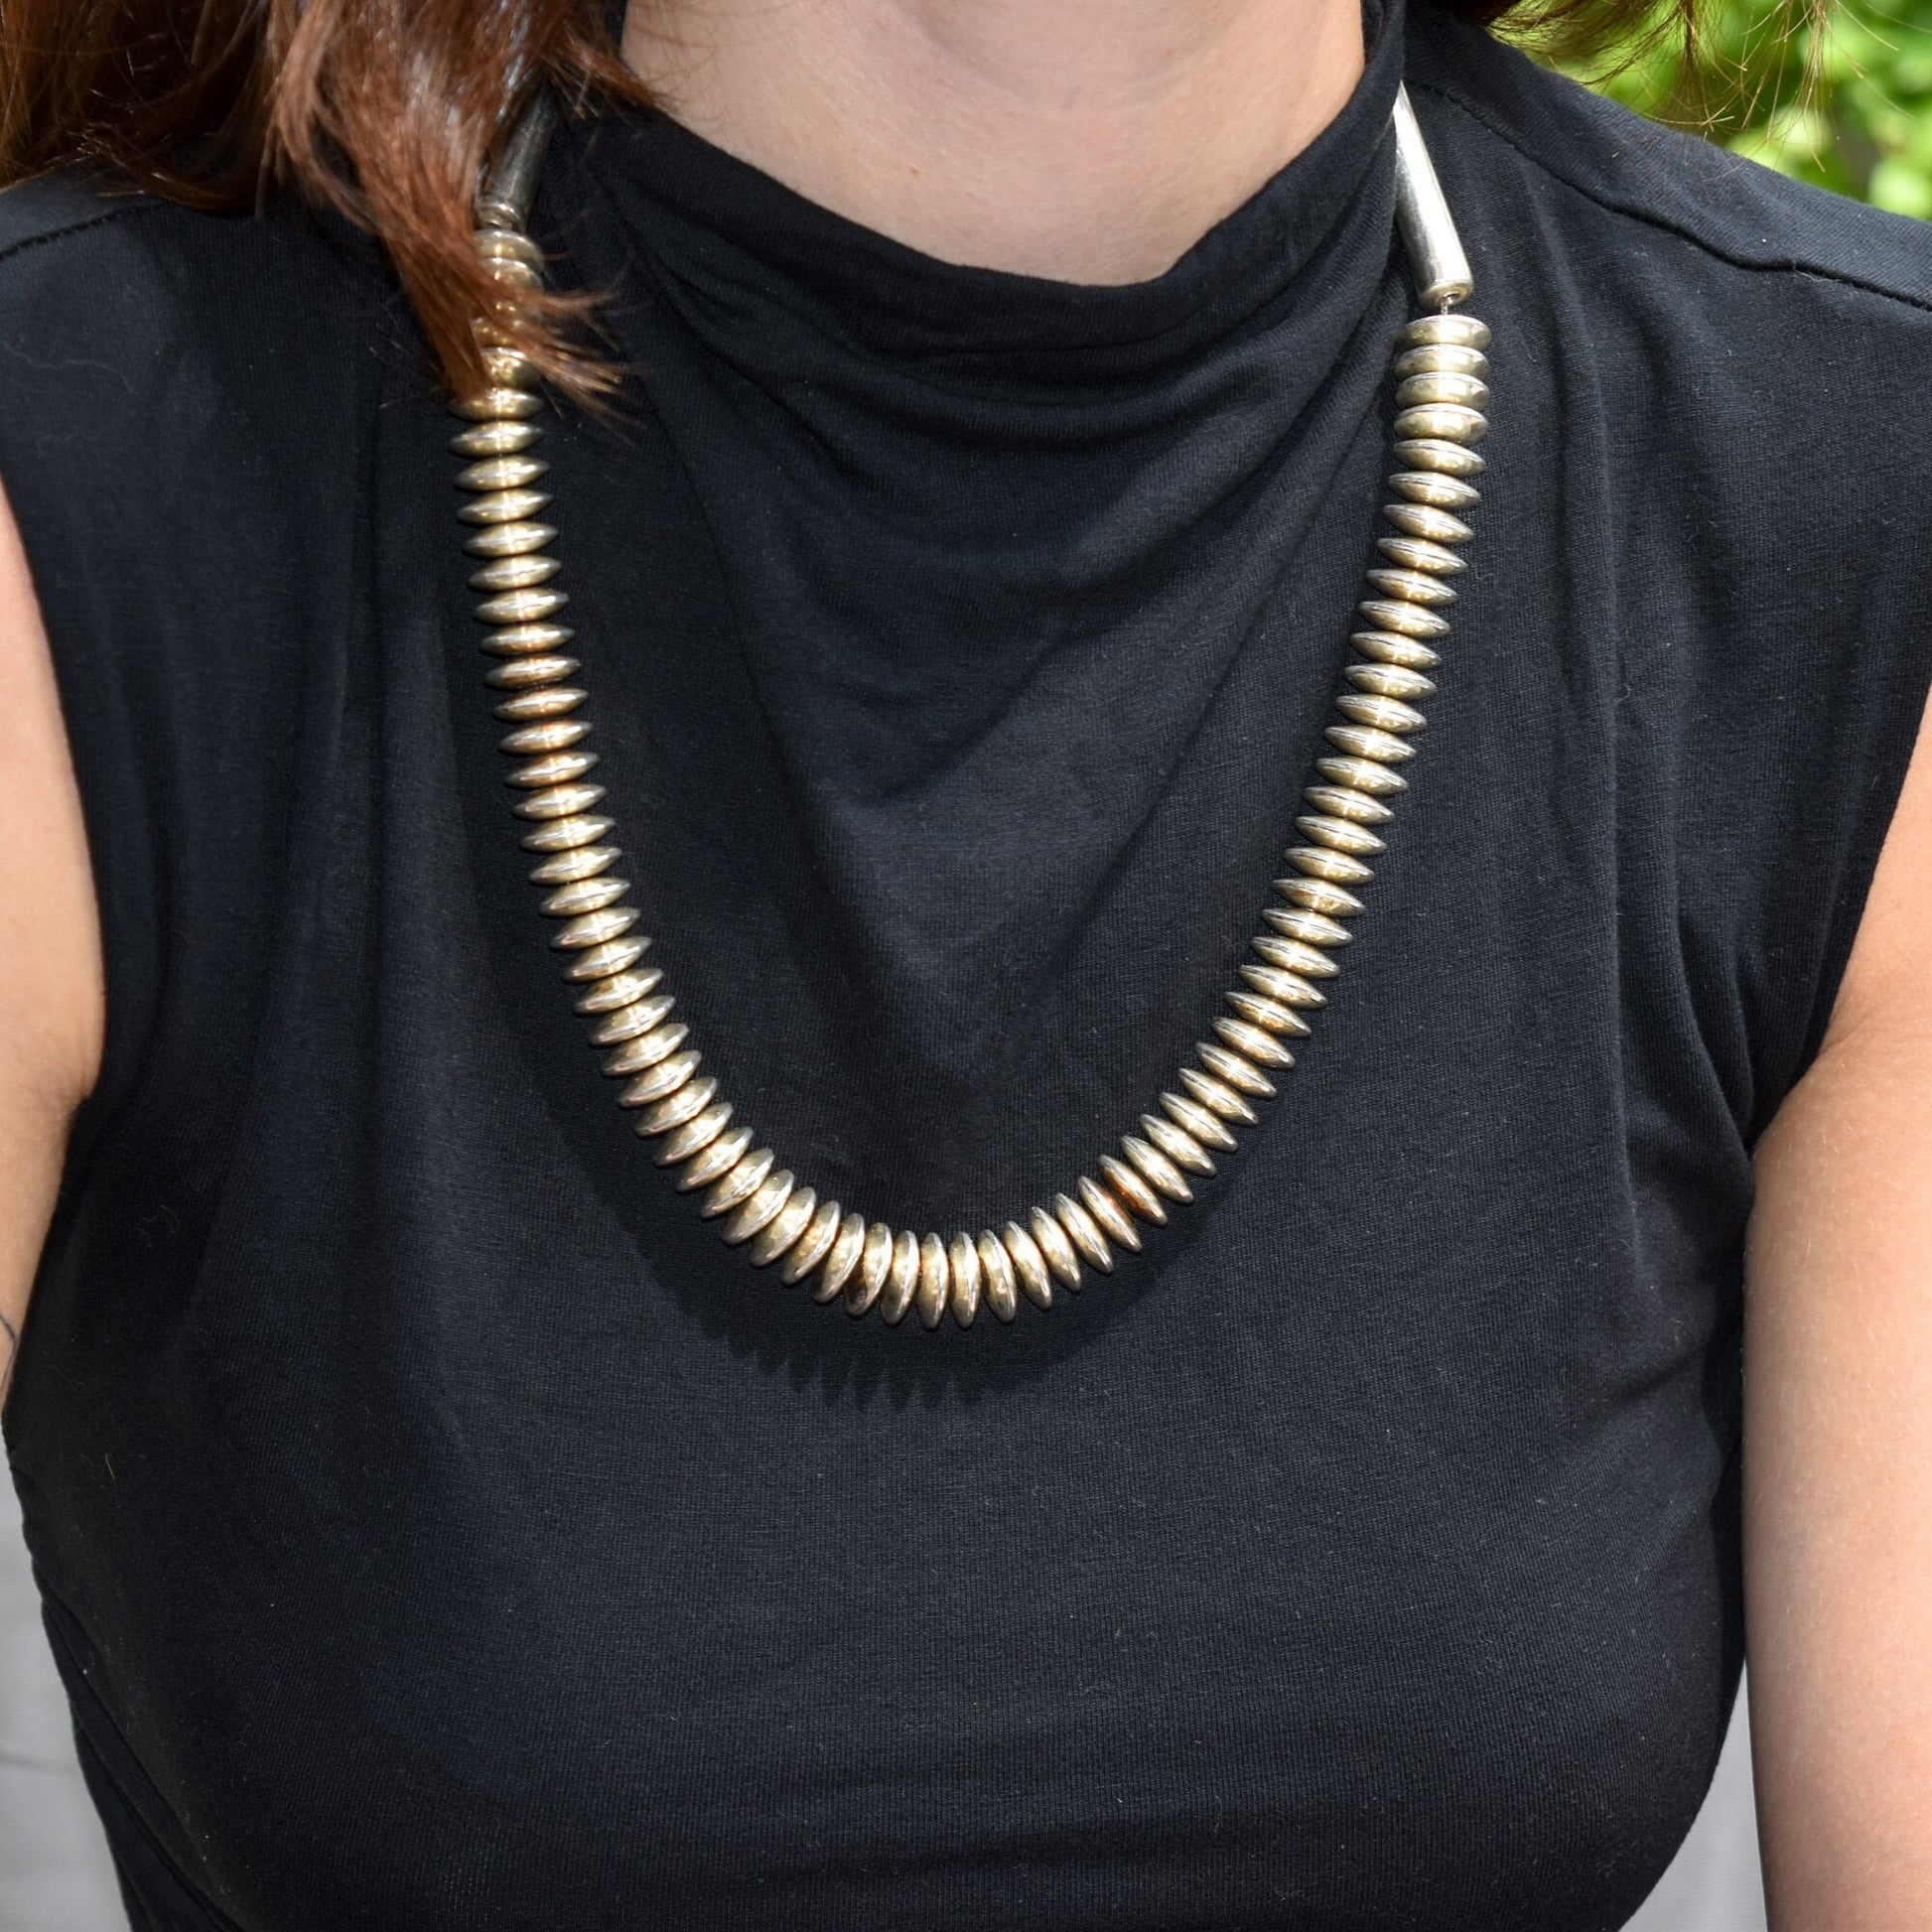 Modernist heavy sterling silver Navajo pearl necklace with saucer-shaped beads worn by a person in a black sleeveless top, showing the necklace resting across their chest and shoulders against the dark fabric background.